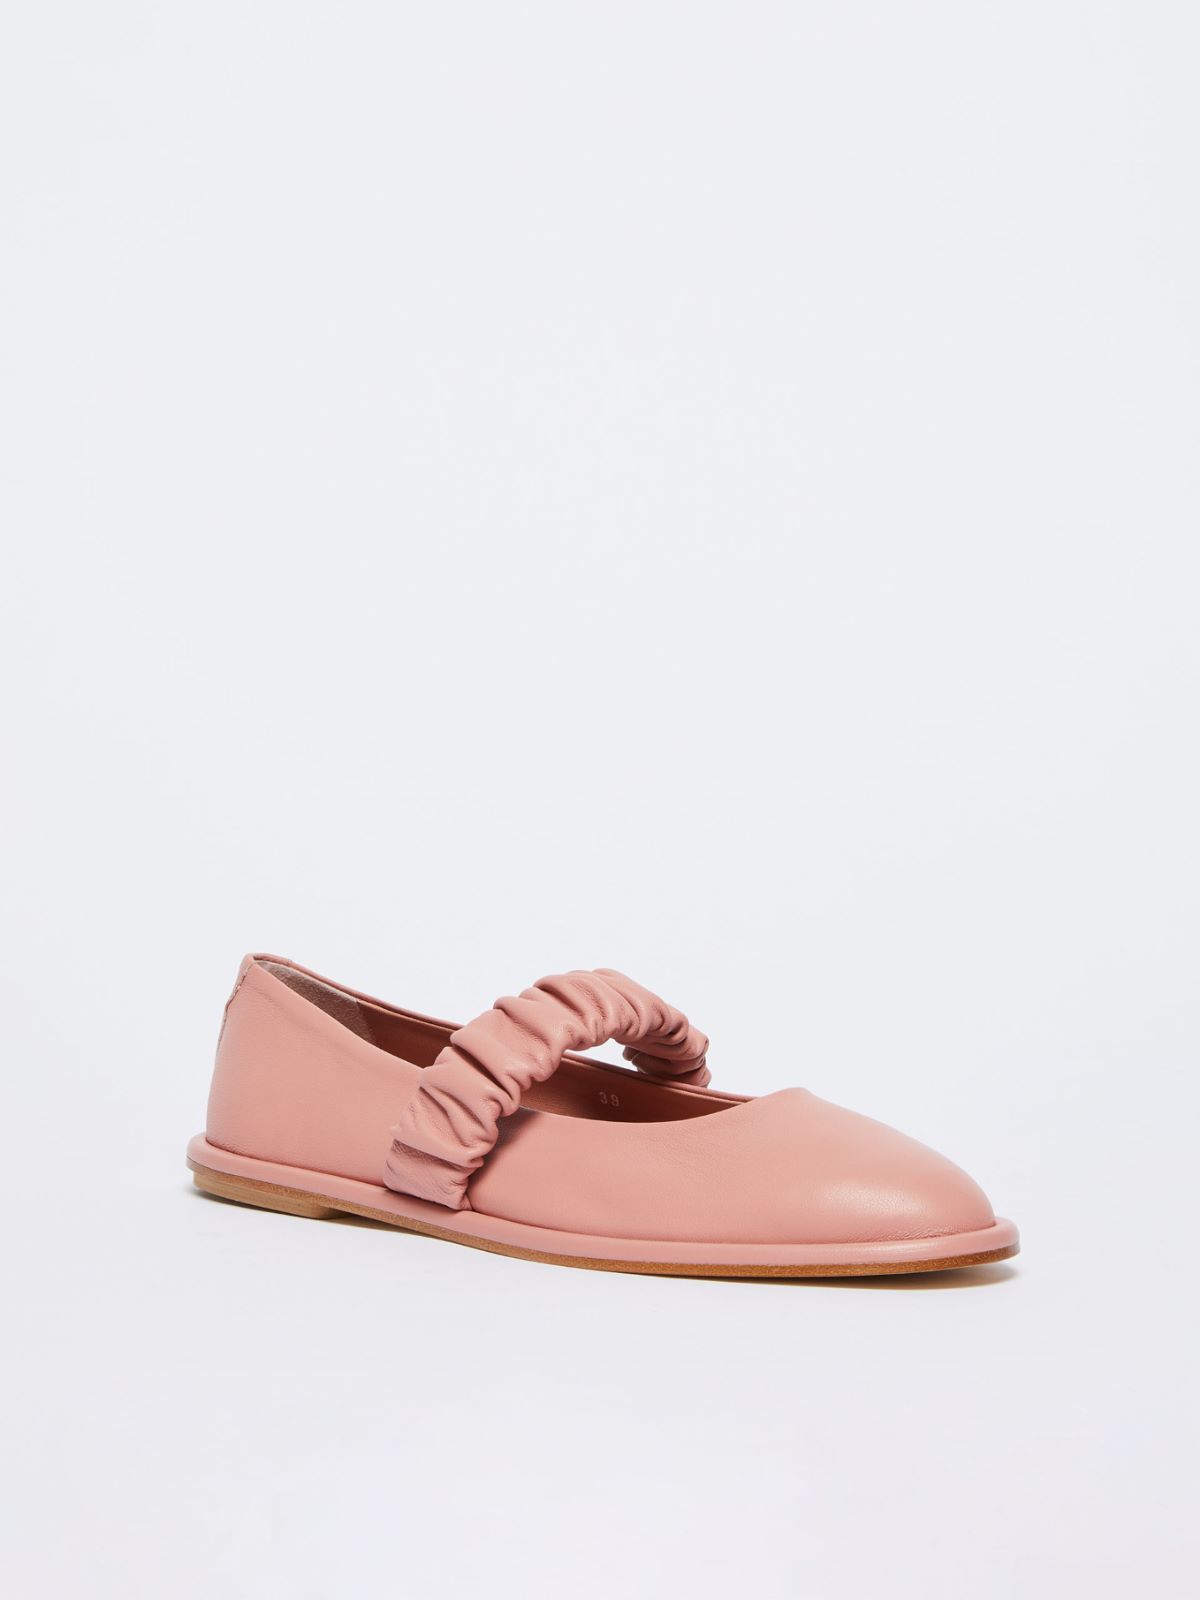 Ballet flats in nappa leather - ANTIQUE ROSE - Weekend Max Mara - 2